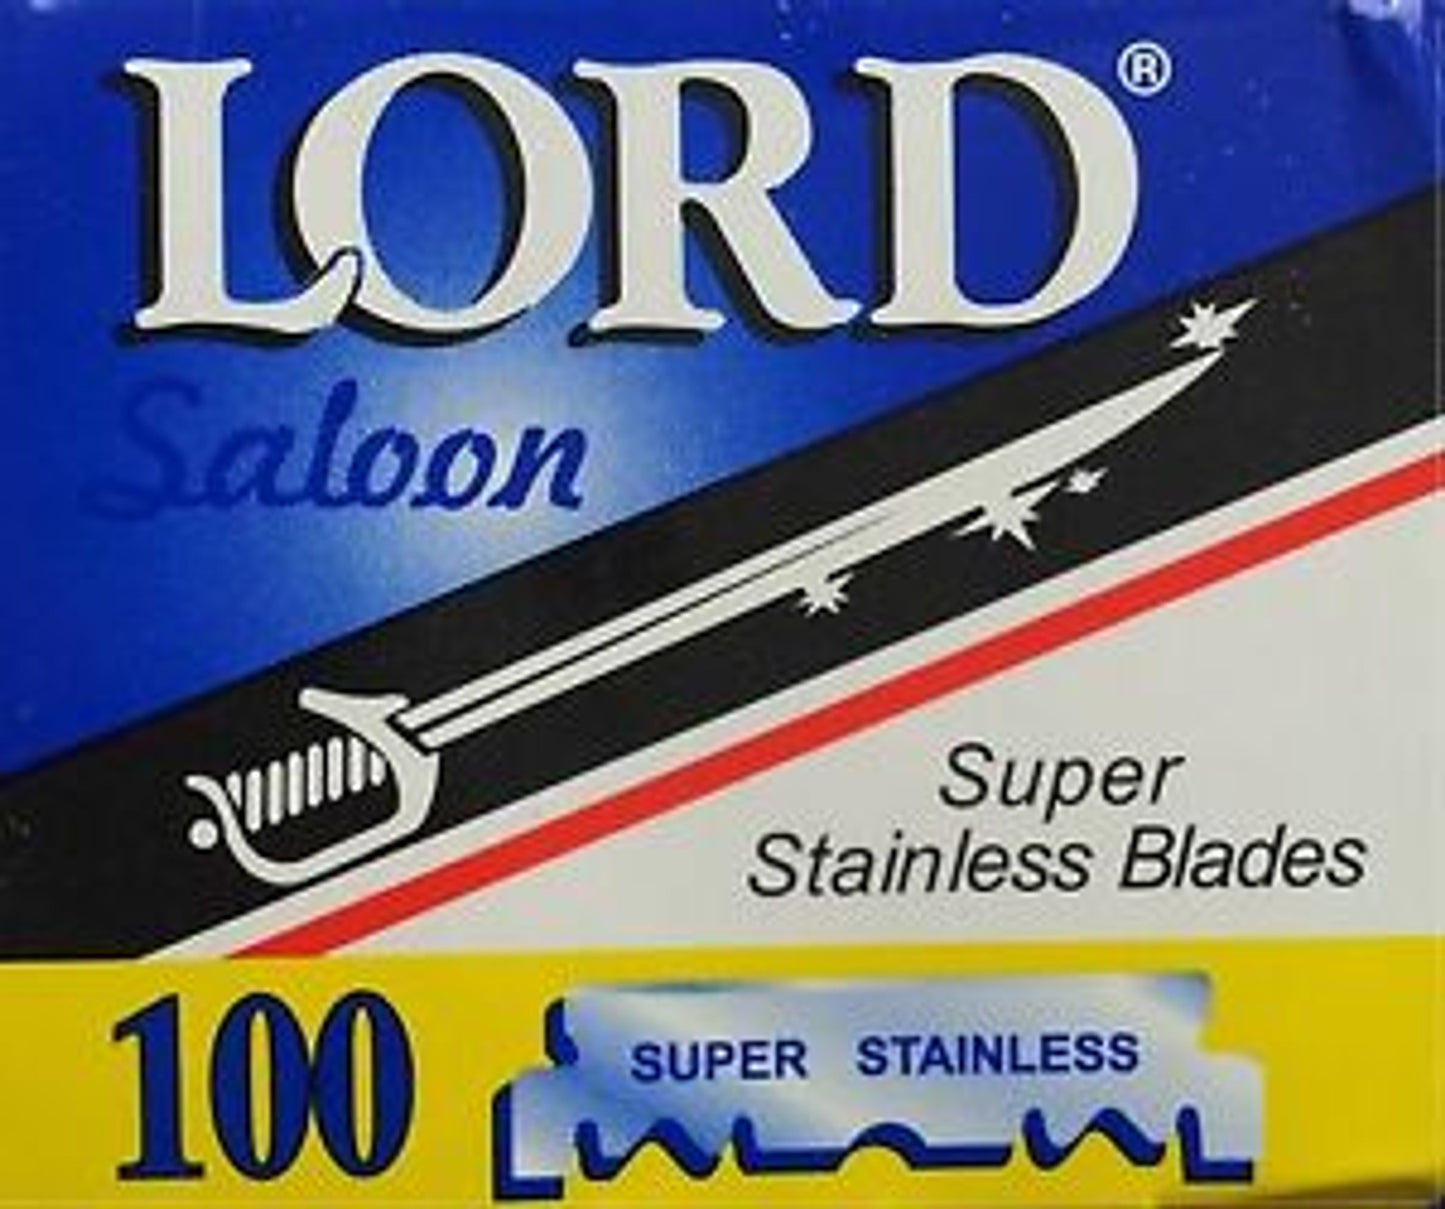 Lord Saloon Super Stainless Blades - 100 count.